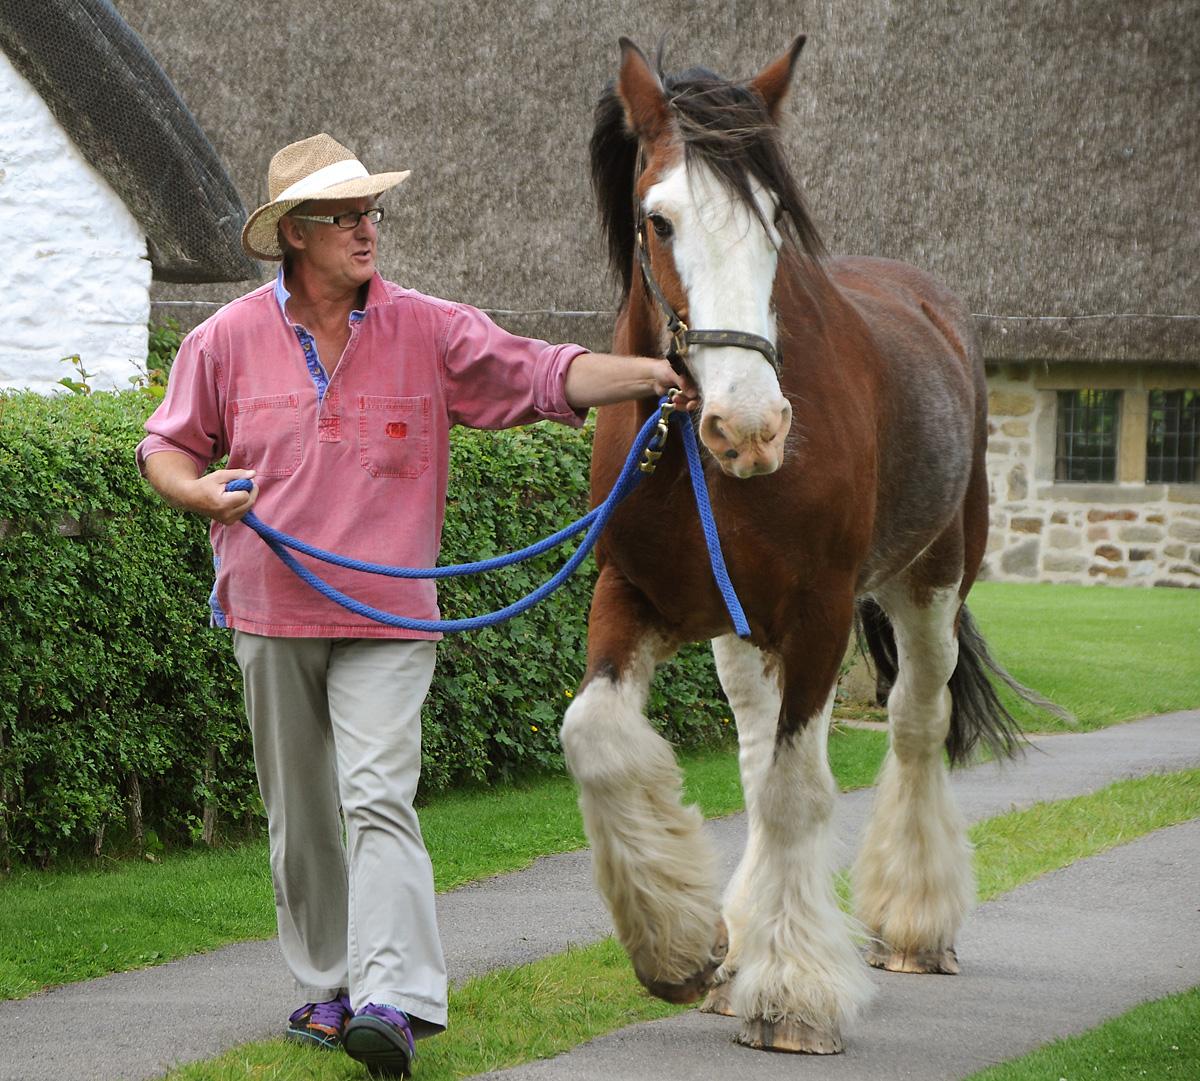 Graham Slater with Max the Clydesdale horse who needs a volunteer to walk him to work at Ryedale Folk Museum.